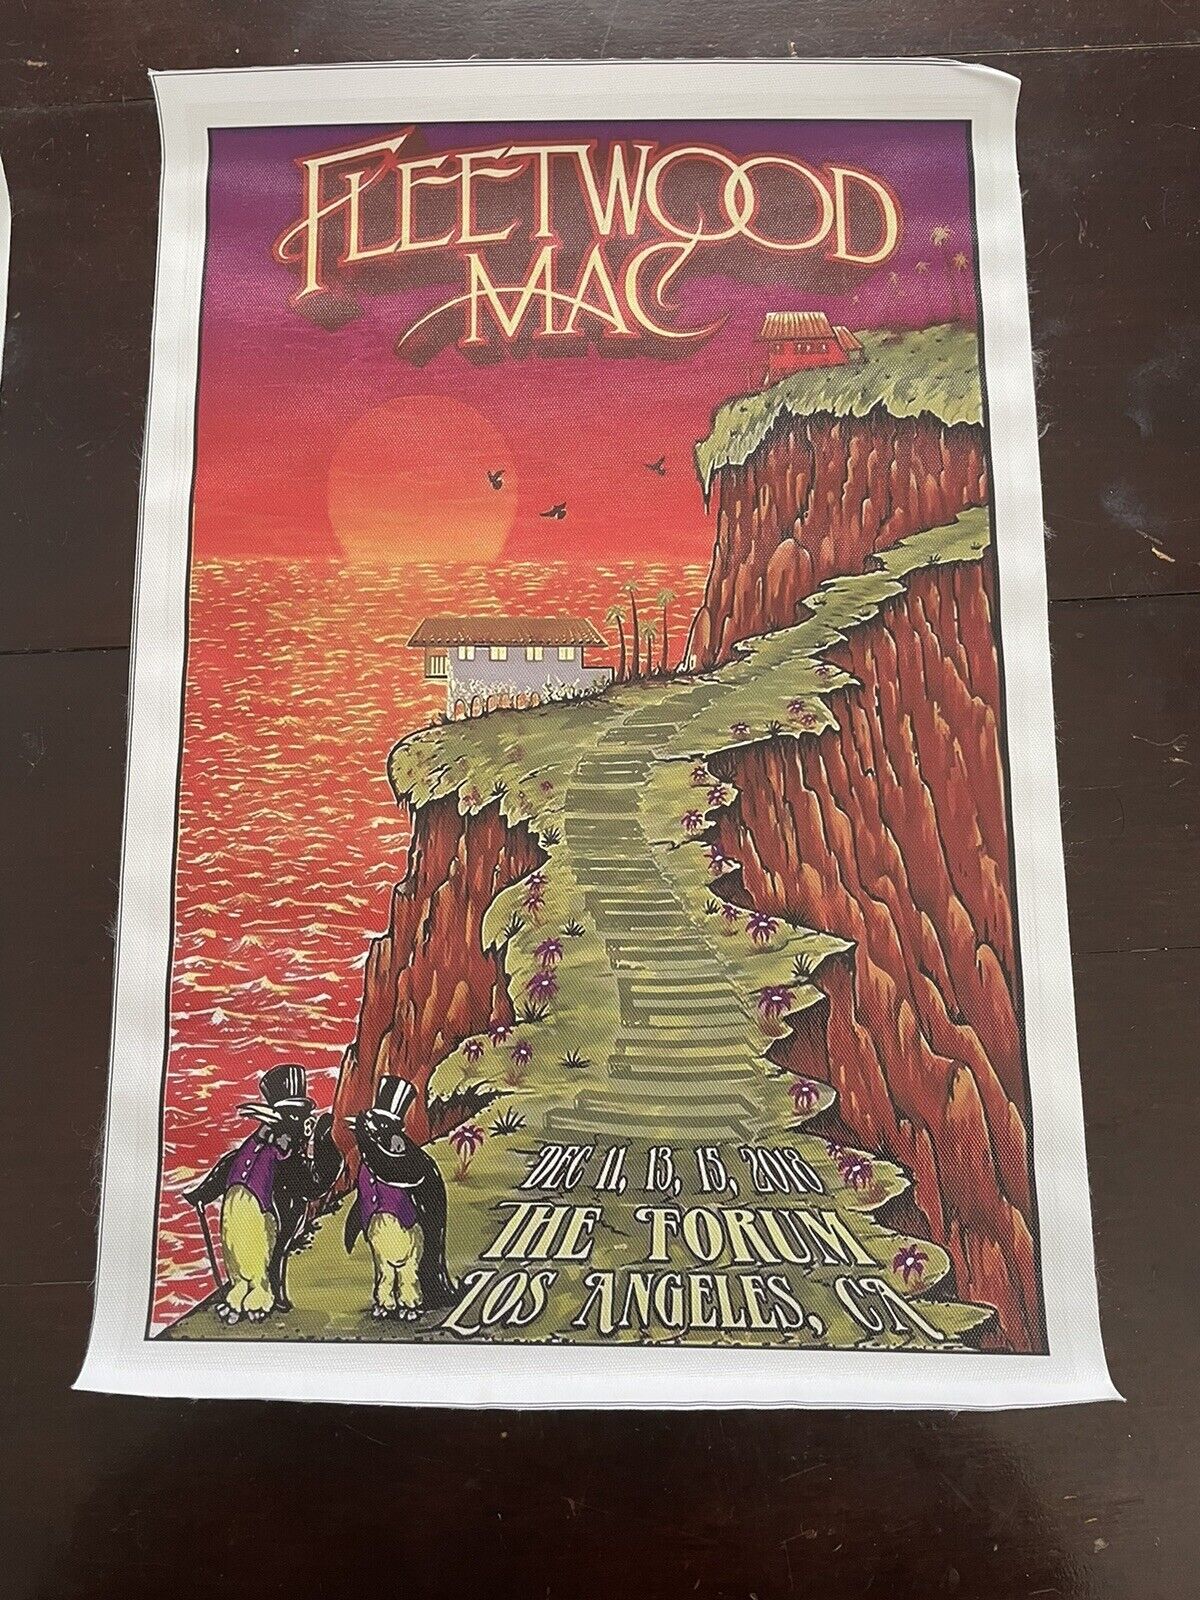 New Vintage Fleetwood Mac Canvas Poster READY TO FRAME 